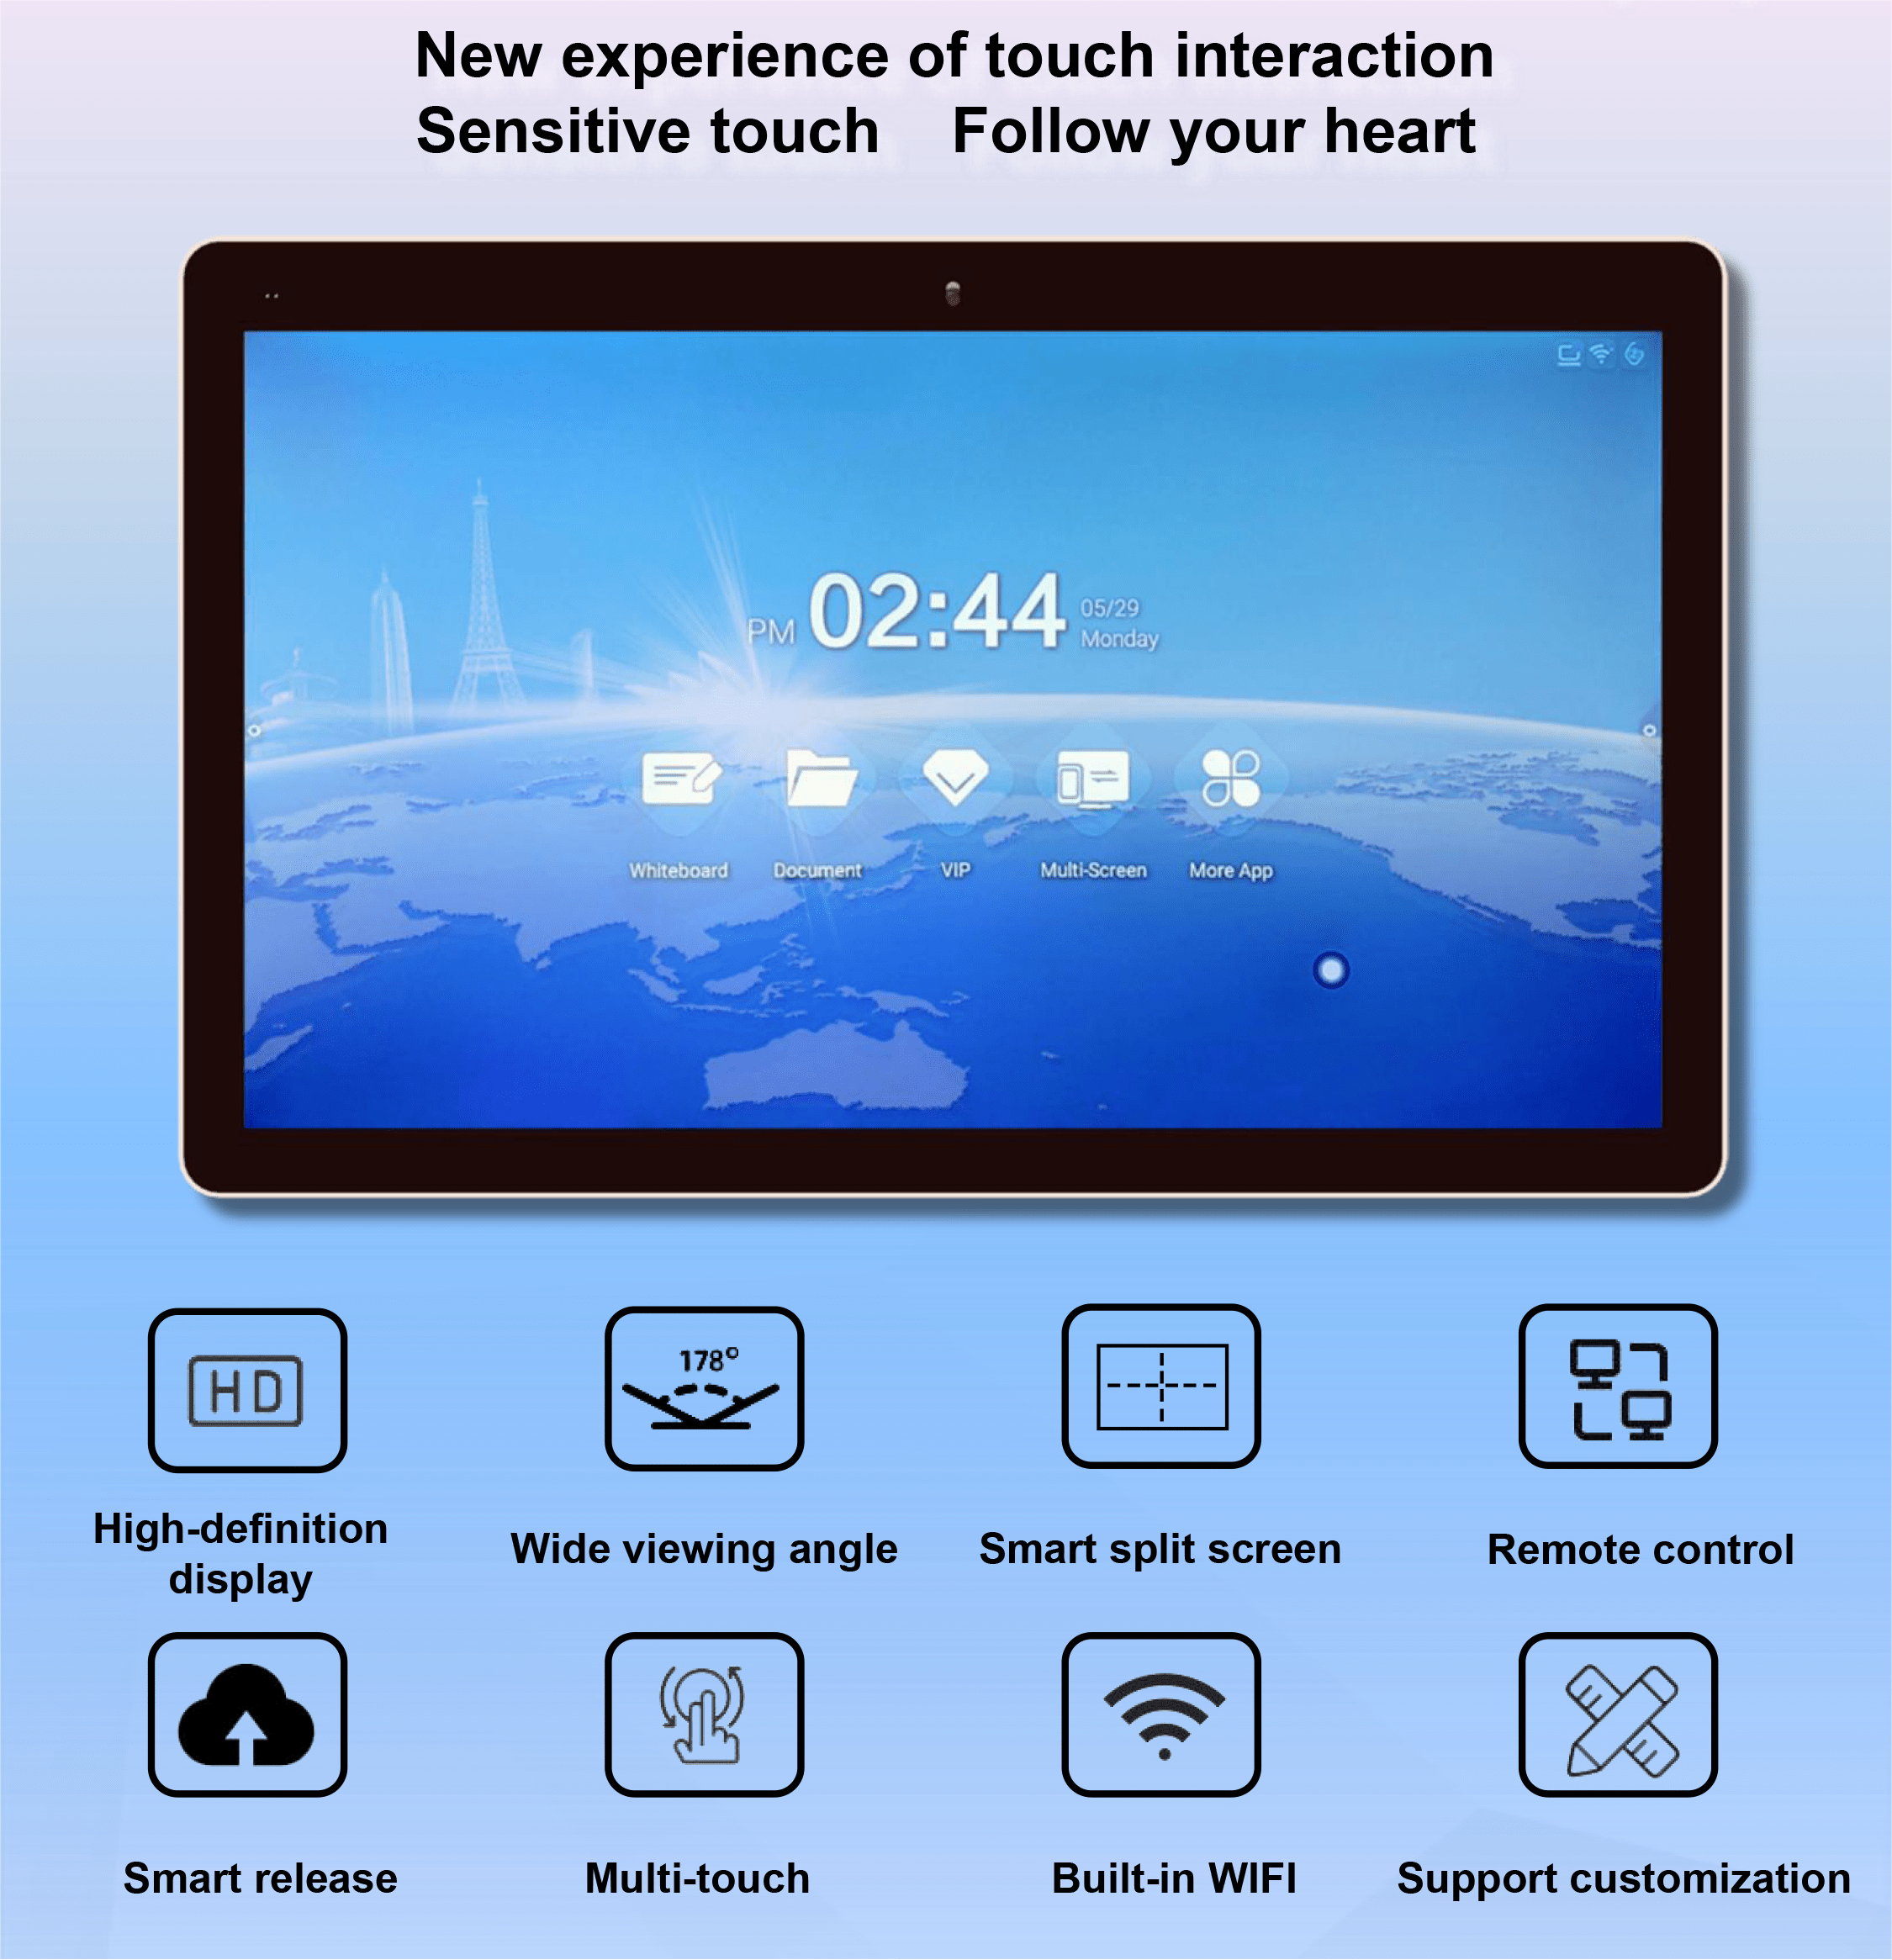 Professional Wall Mounted Multi-touch Screen Display introduction